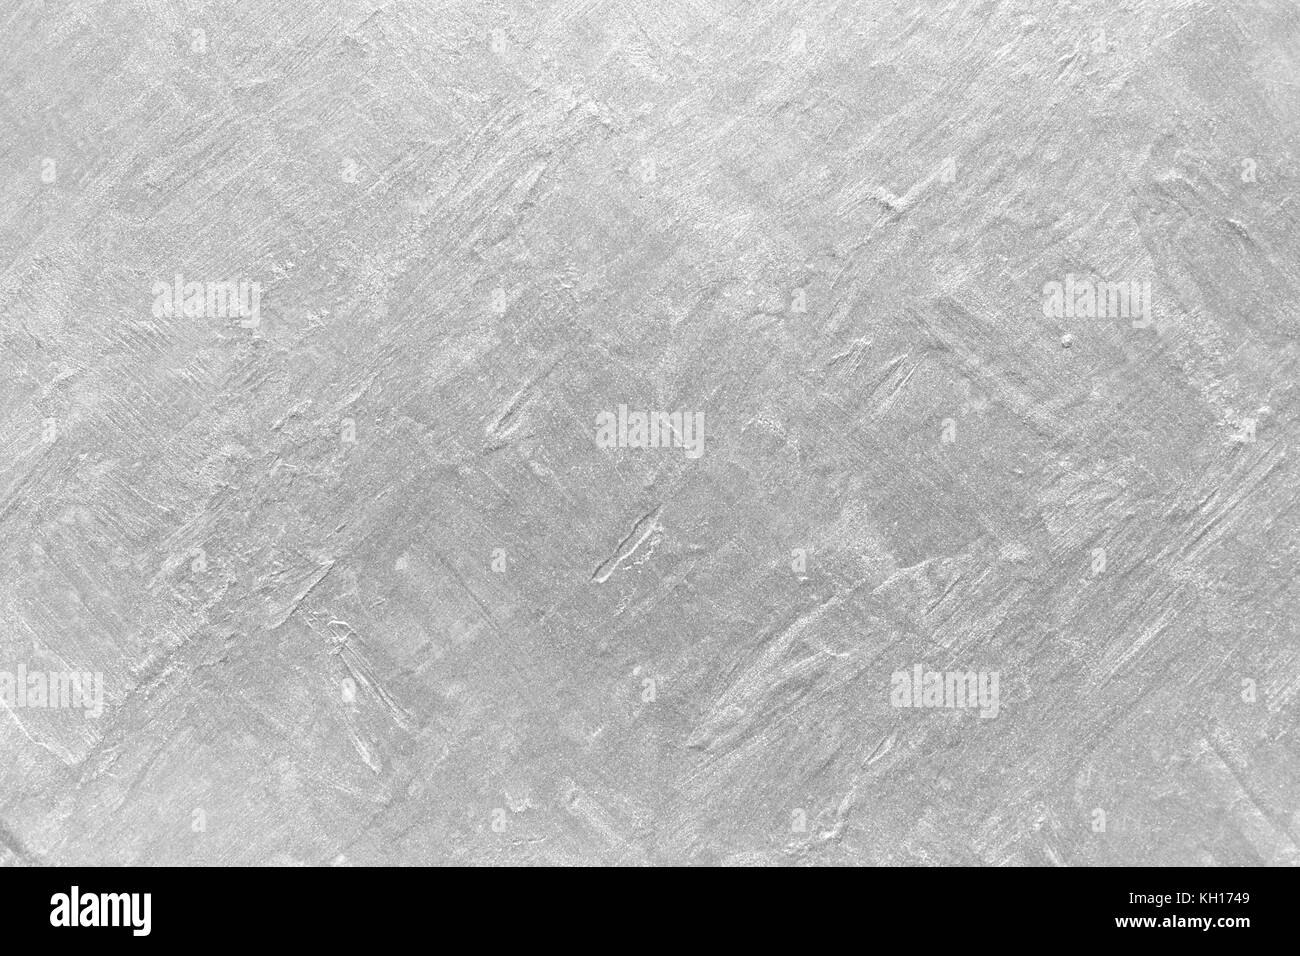 Silver textures background close up Stock Photo